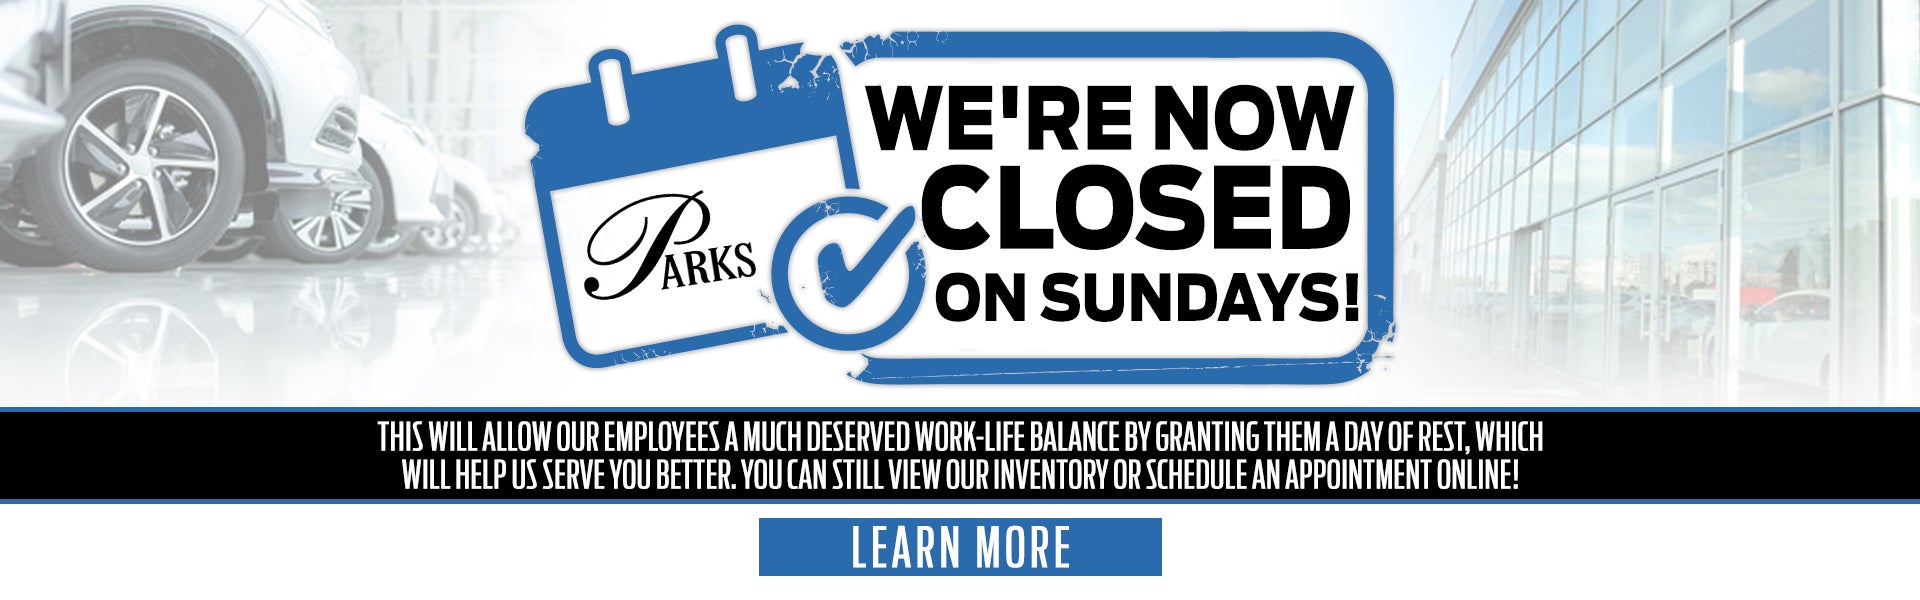 Parks Ford of Gainesville FL is Closed on Sunday!